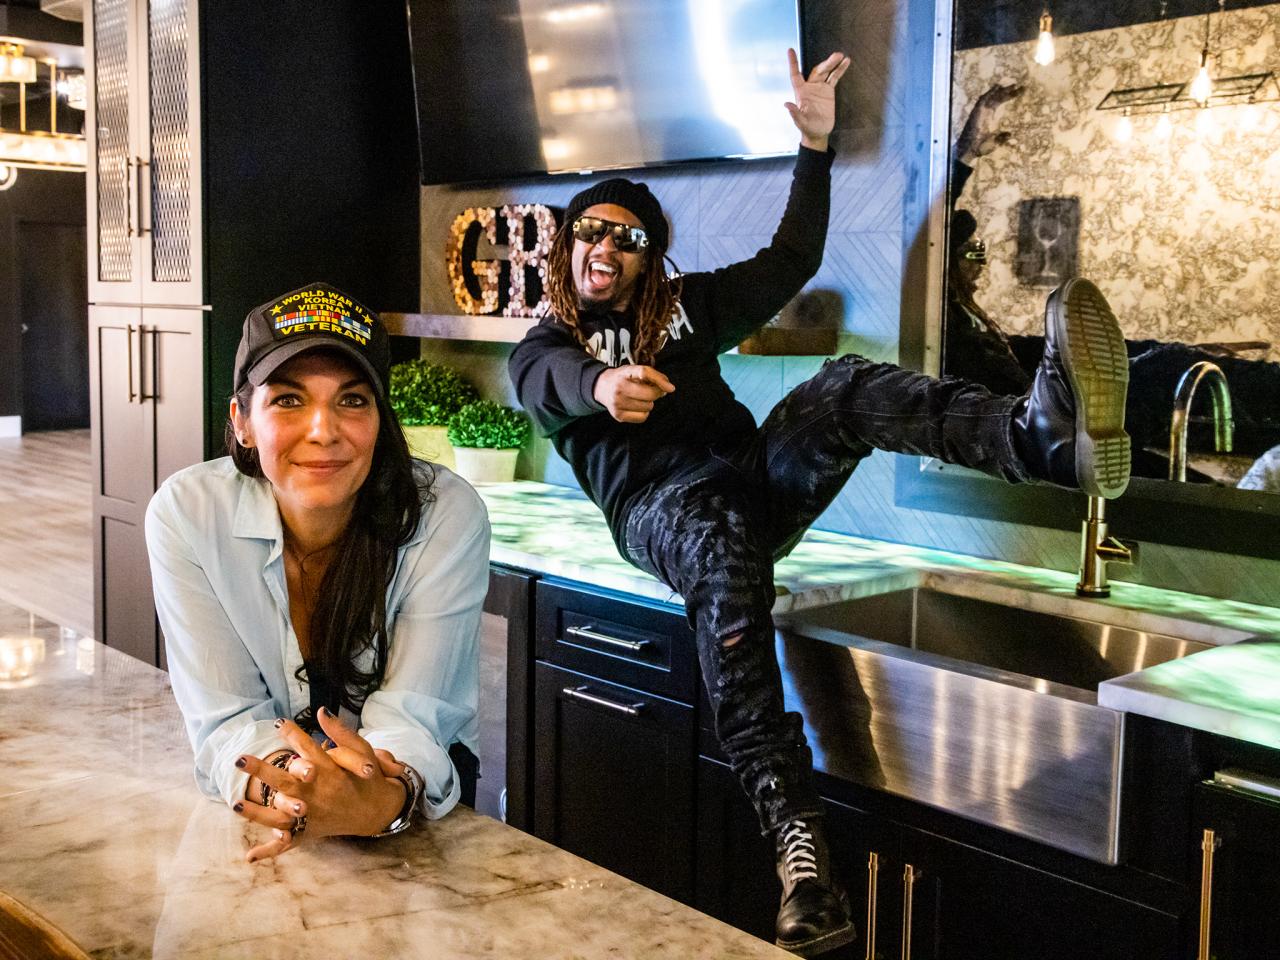 Lil Jon's Most Unique Home Design Ideas, Lil Jon Wants to Do What?